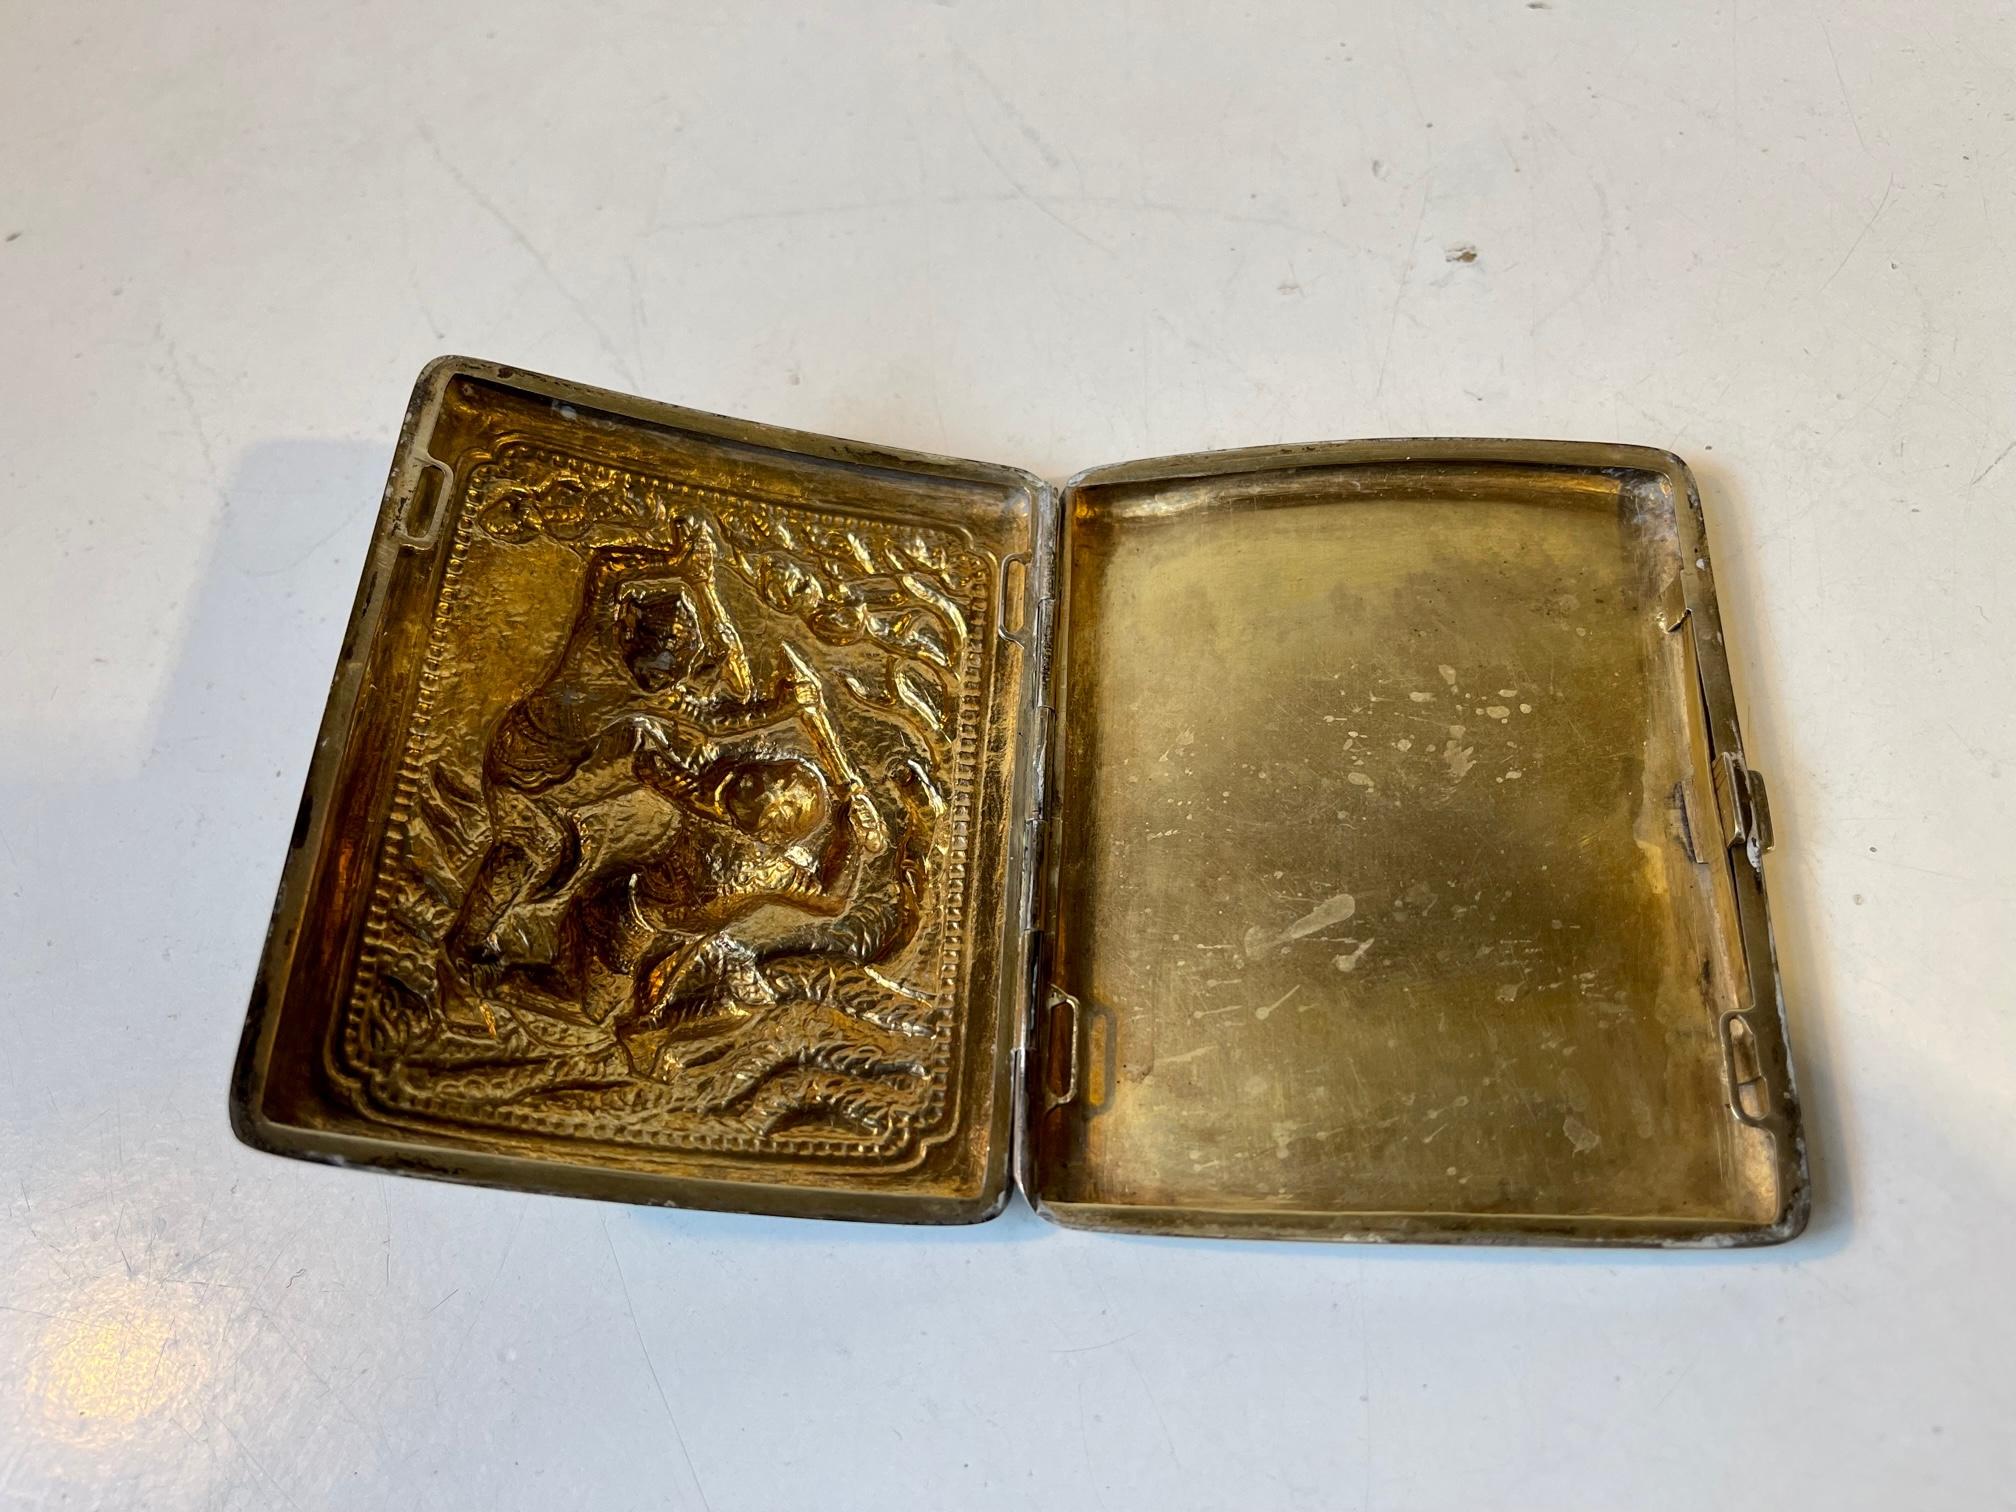 Hand-Crafted Antique Asian Export Silver Cigarette Case with Battlescene For Sale